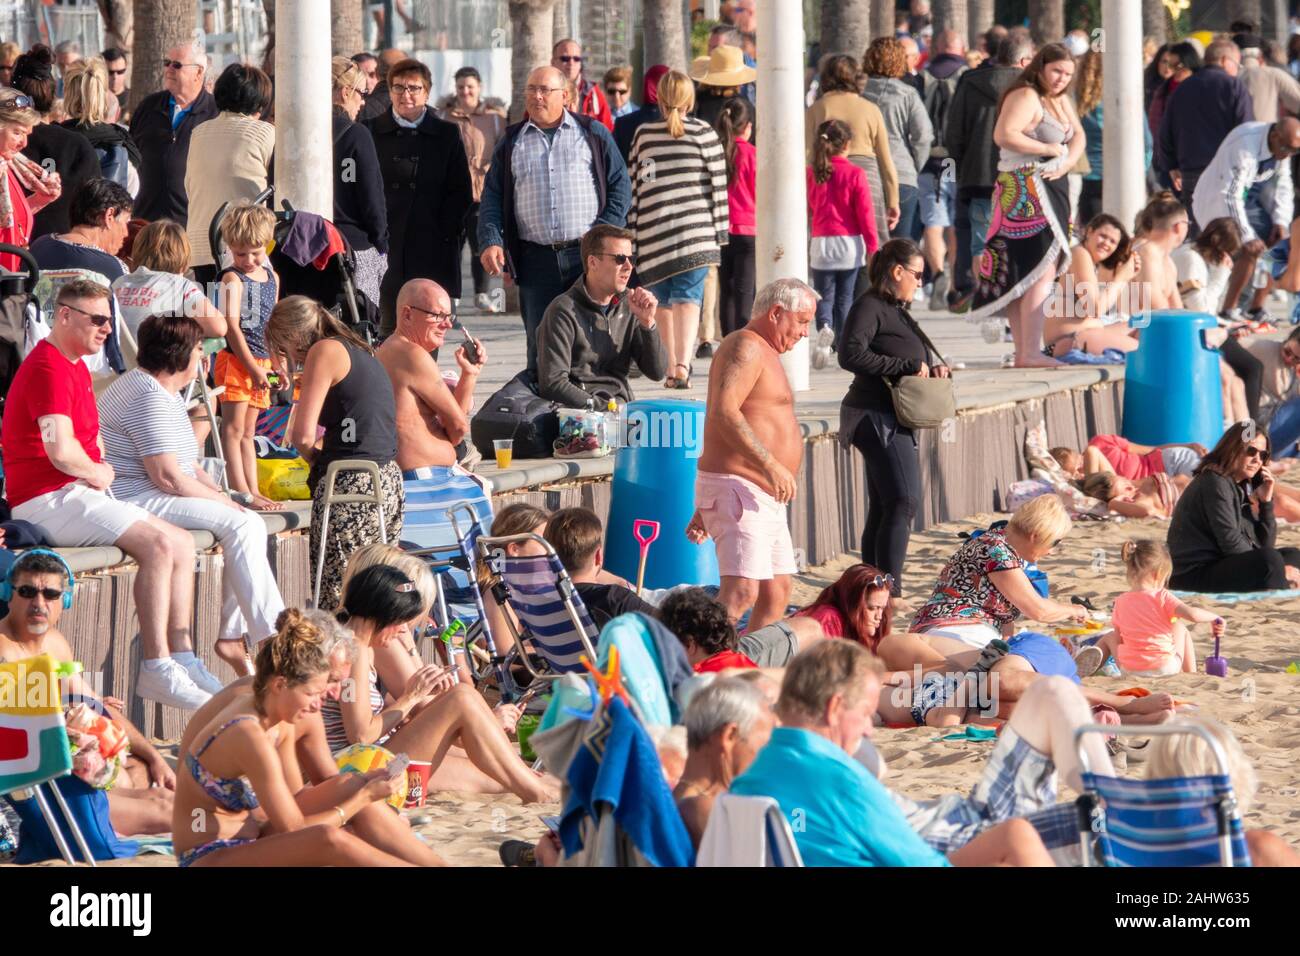 Benidorm, Alicante Province, Spain. 1st January 2020. Tourists and locals enjoy the warm, sunny weather on Levante beach on New Years Day. Crowded beach scene. Credit: Mick Flynn/Alamy Live News Stock Photo